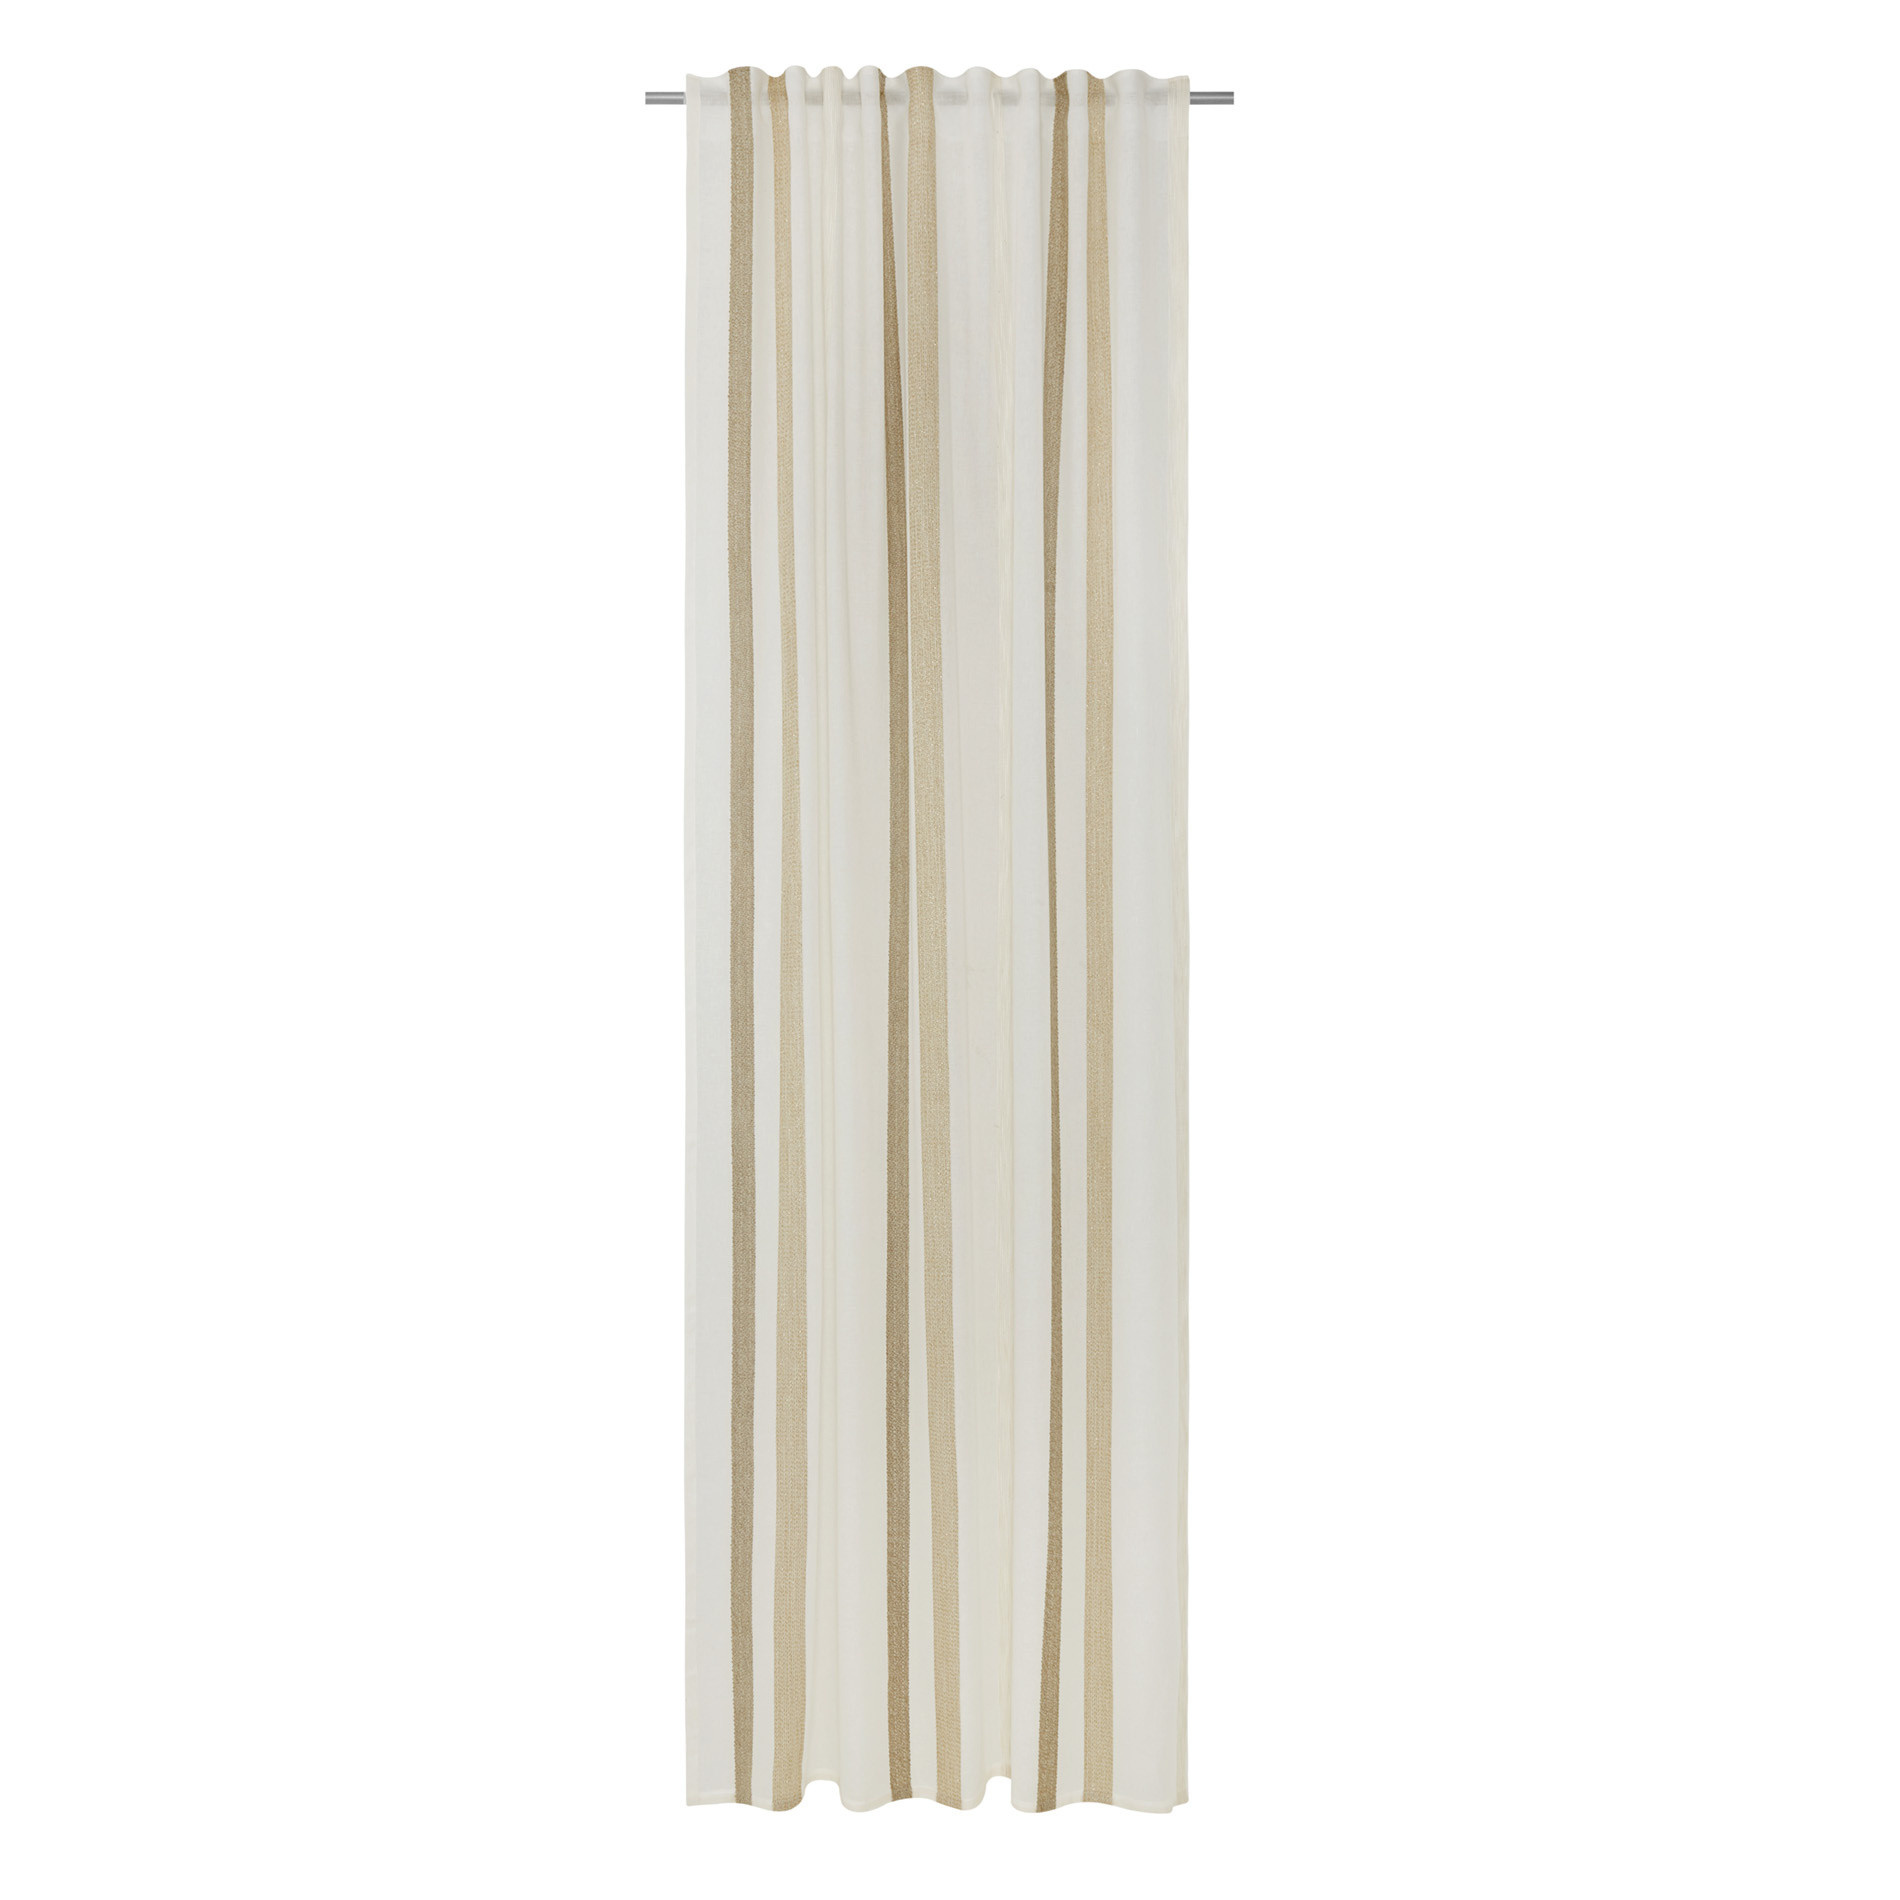 Curtain fabric with hidden pass-through stripes, Light Beige, large image number 3